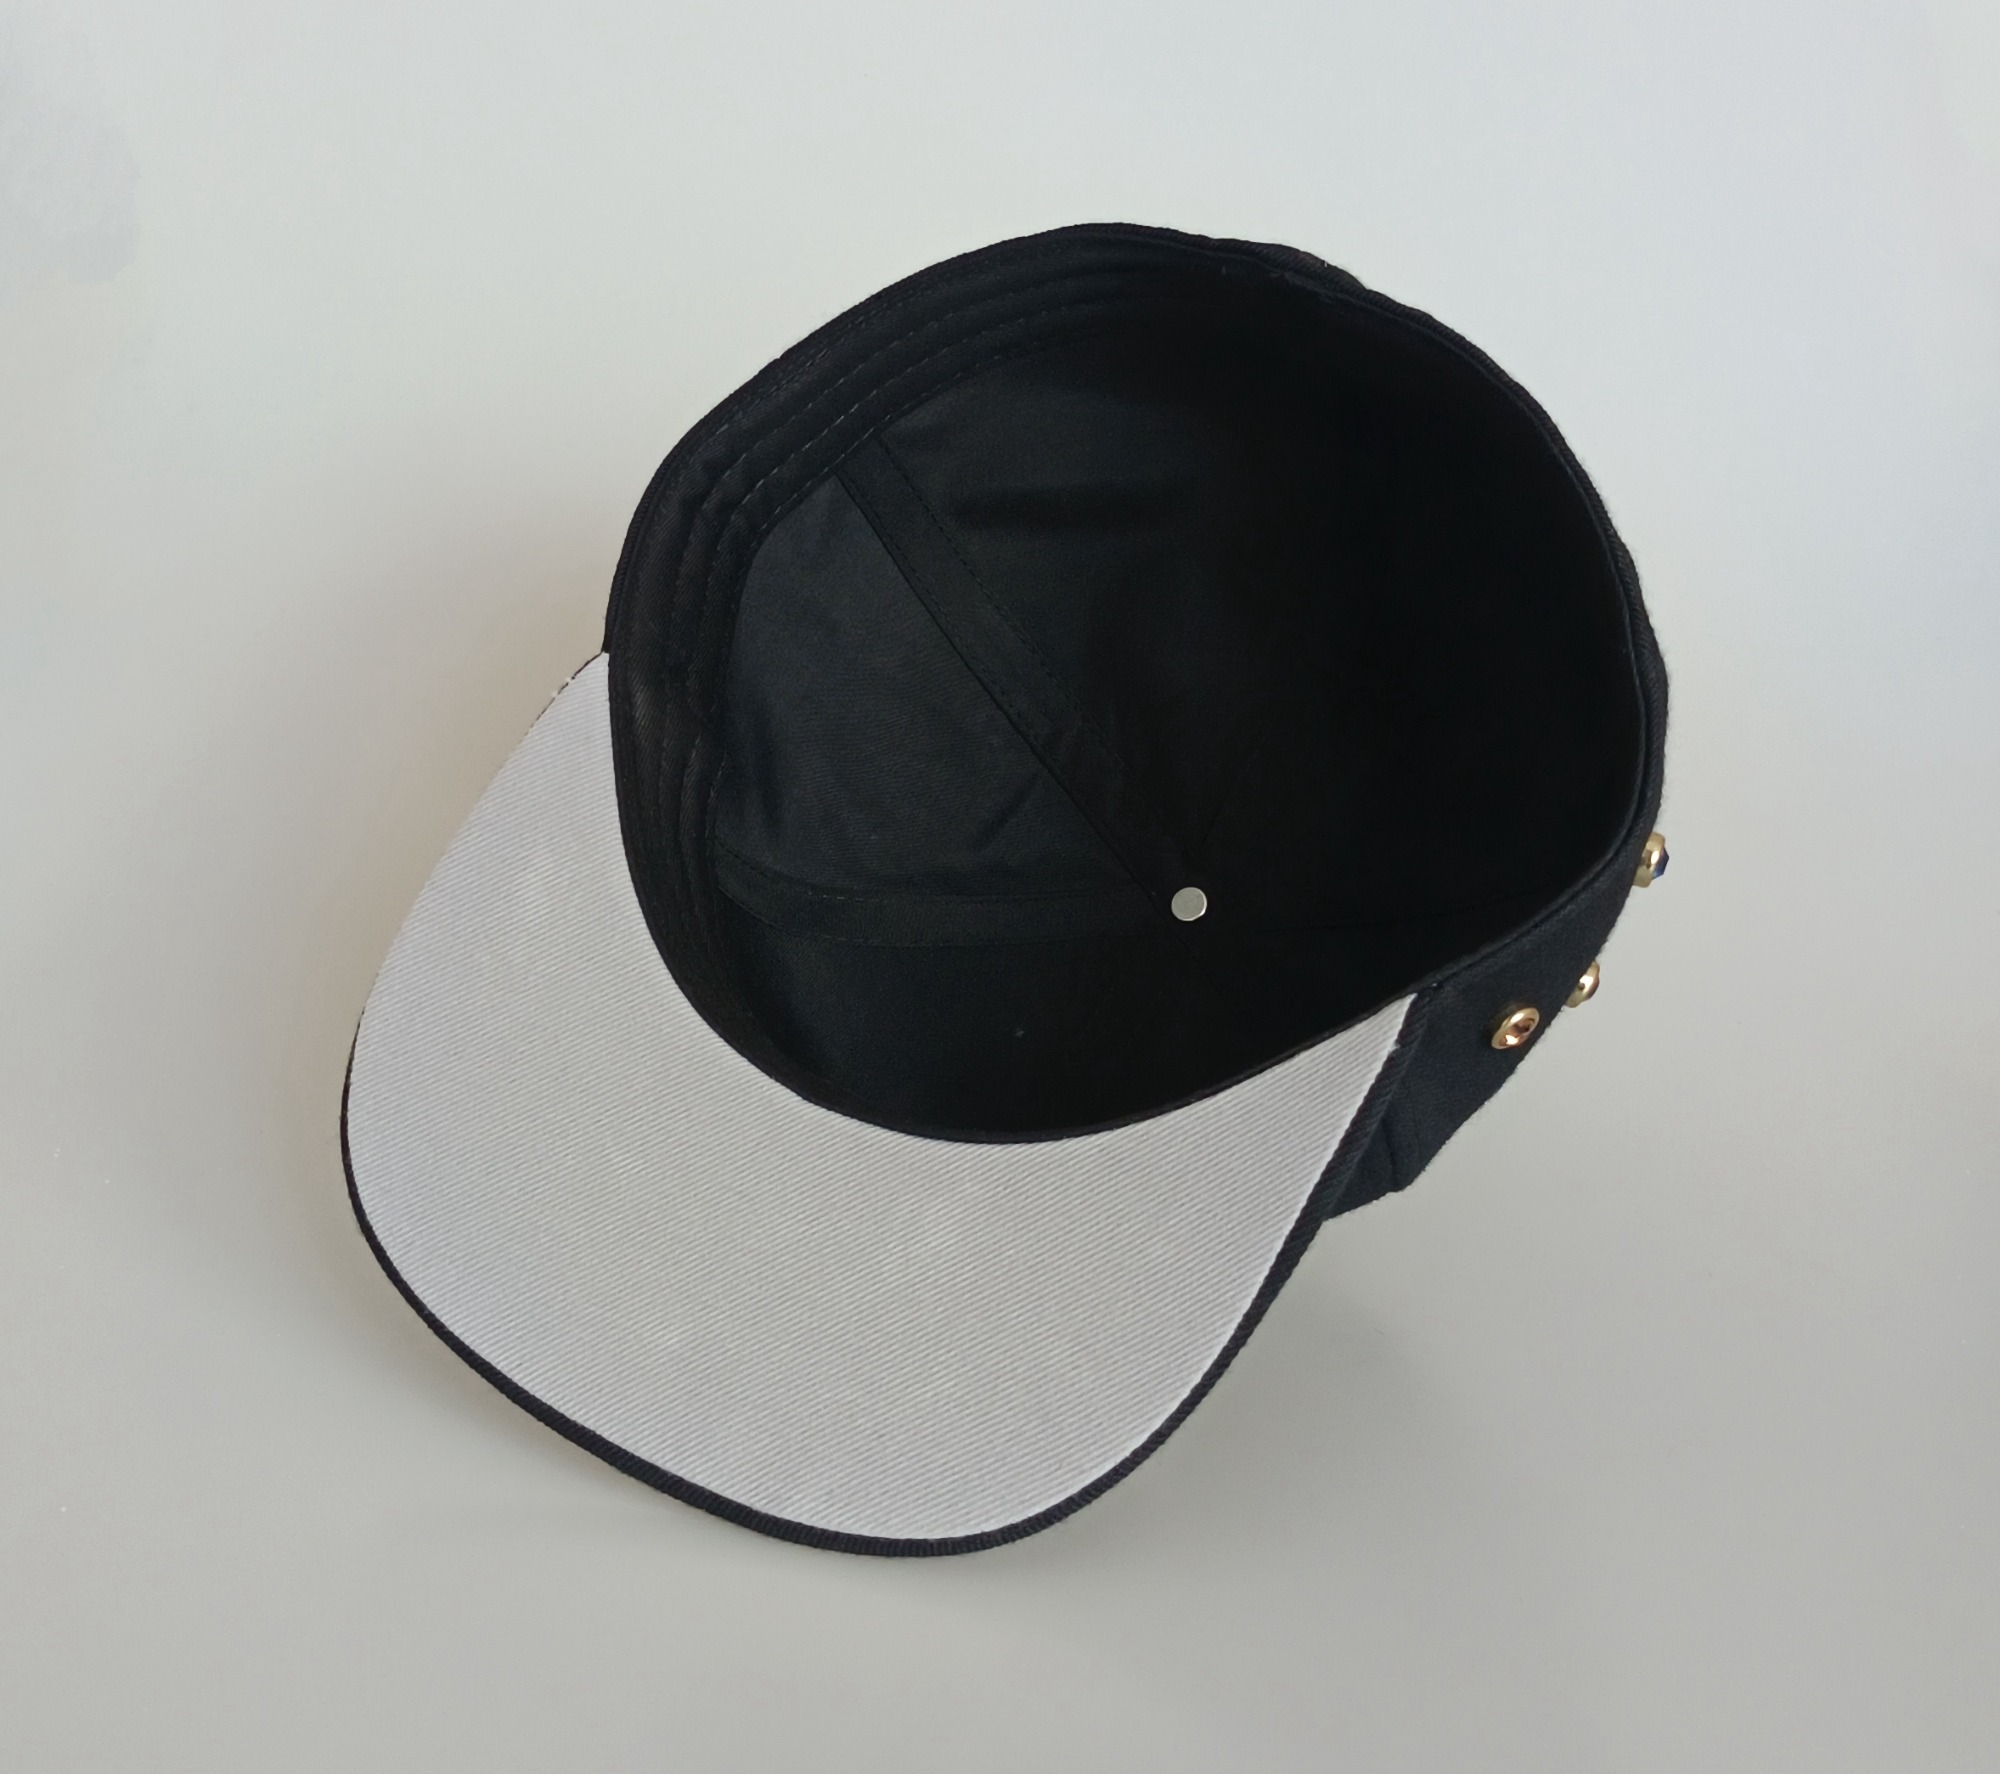 High quality wool acrylic blend 6 panel flat brim fitted hat colorful Rhinestones inlaid snapback cap